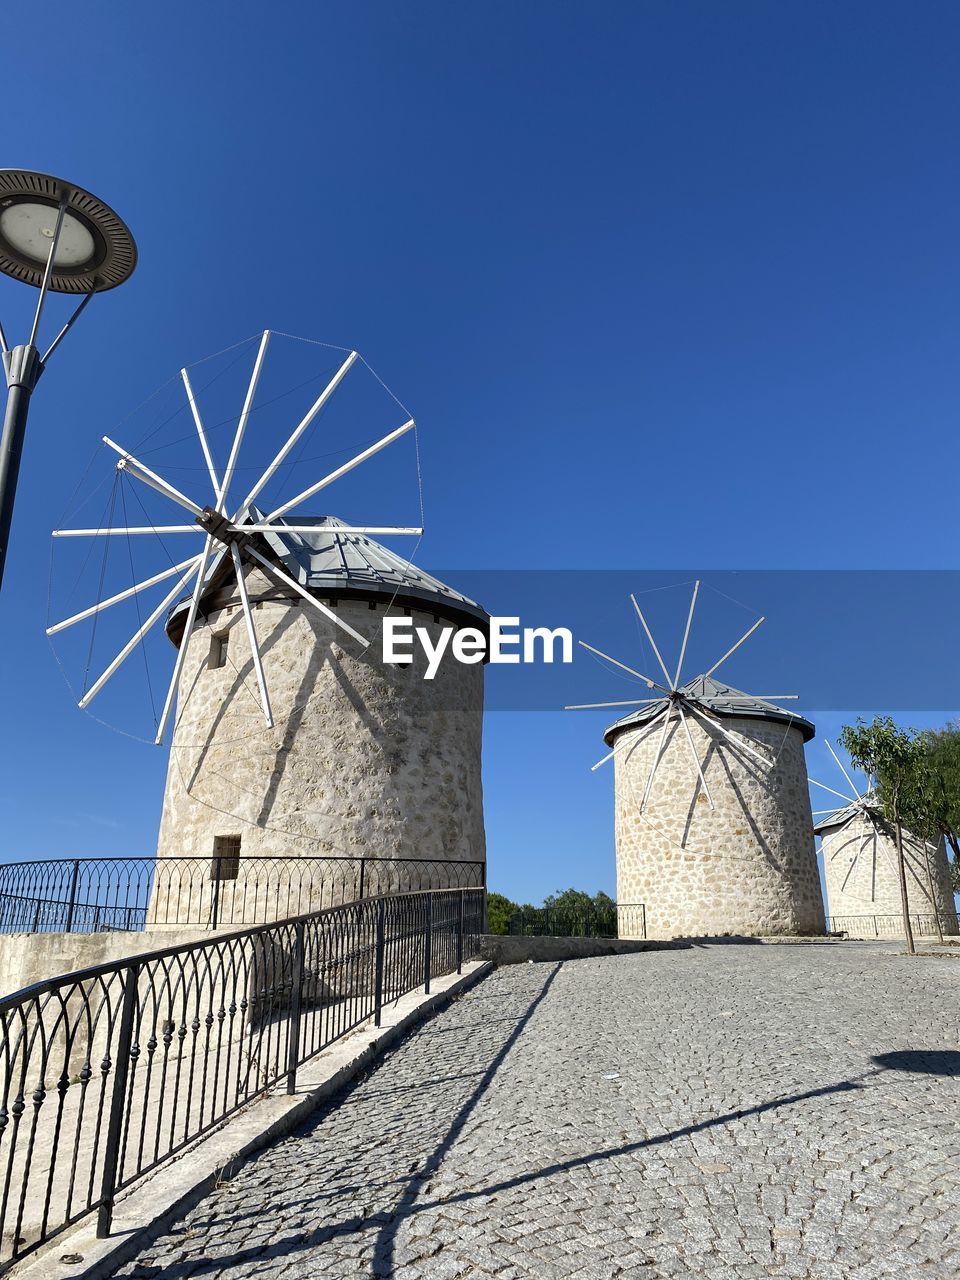 sky, windmill, architecture, clear sky, blue, built structure, wind, nature, renewable energy, low angle view, building exterior, alternative energy, environmental conservation, no people, wind power, day, wind turbine, sunny, turbine, power generation, technology, building, outdoors, sunlight, mill, tower, city, communication, environment, satellite dish, satellite